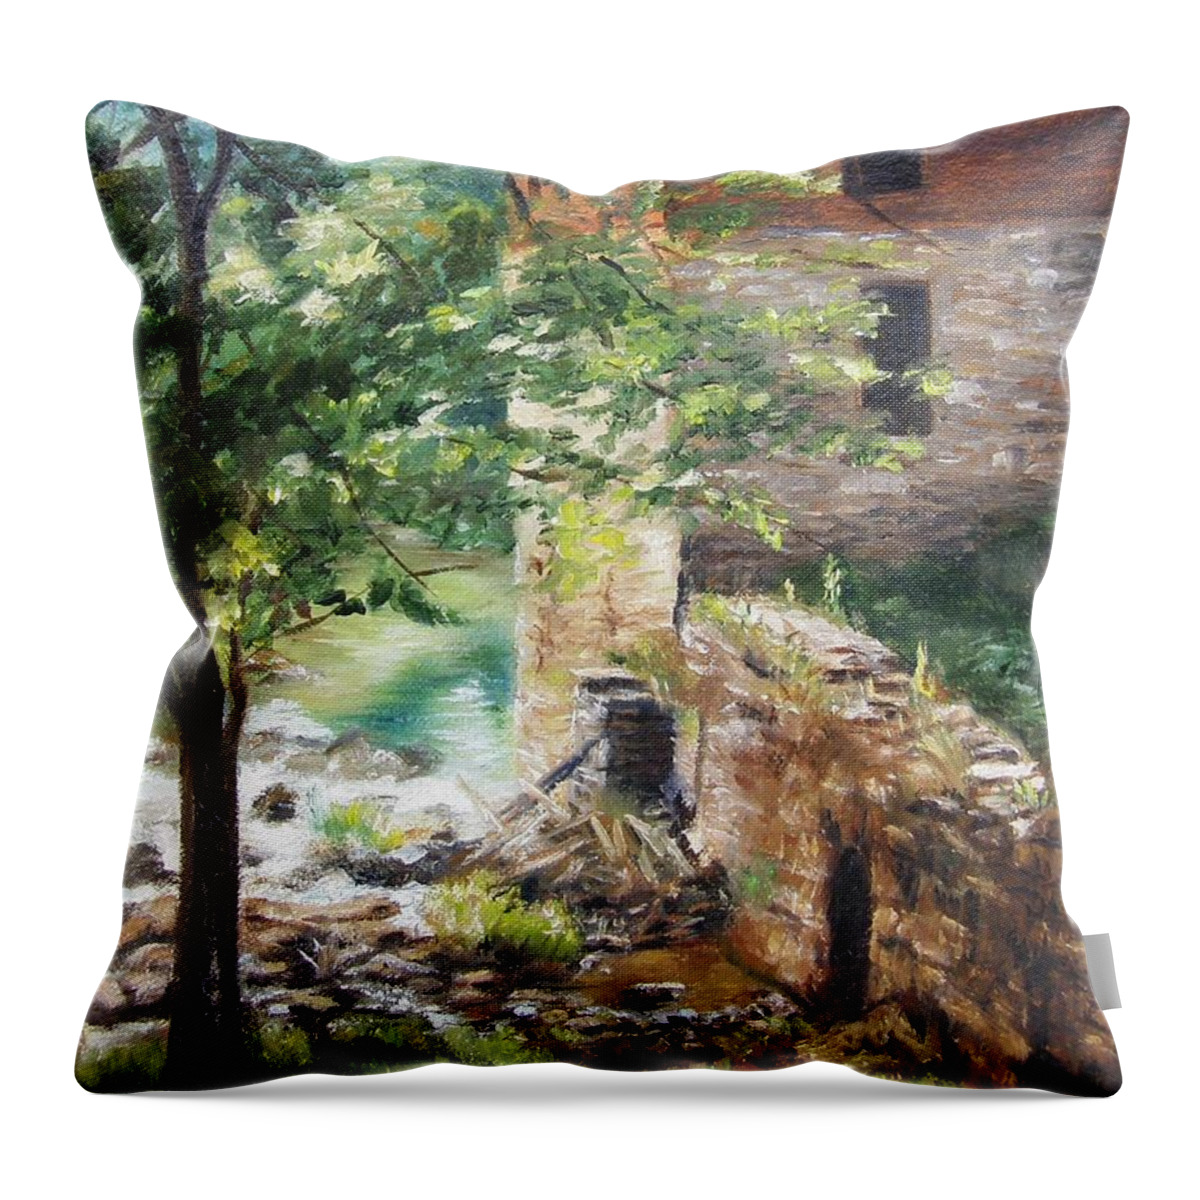 Water Throw Pillow featuring the painting Old Mill Stream I by Lori Brackett